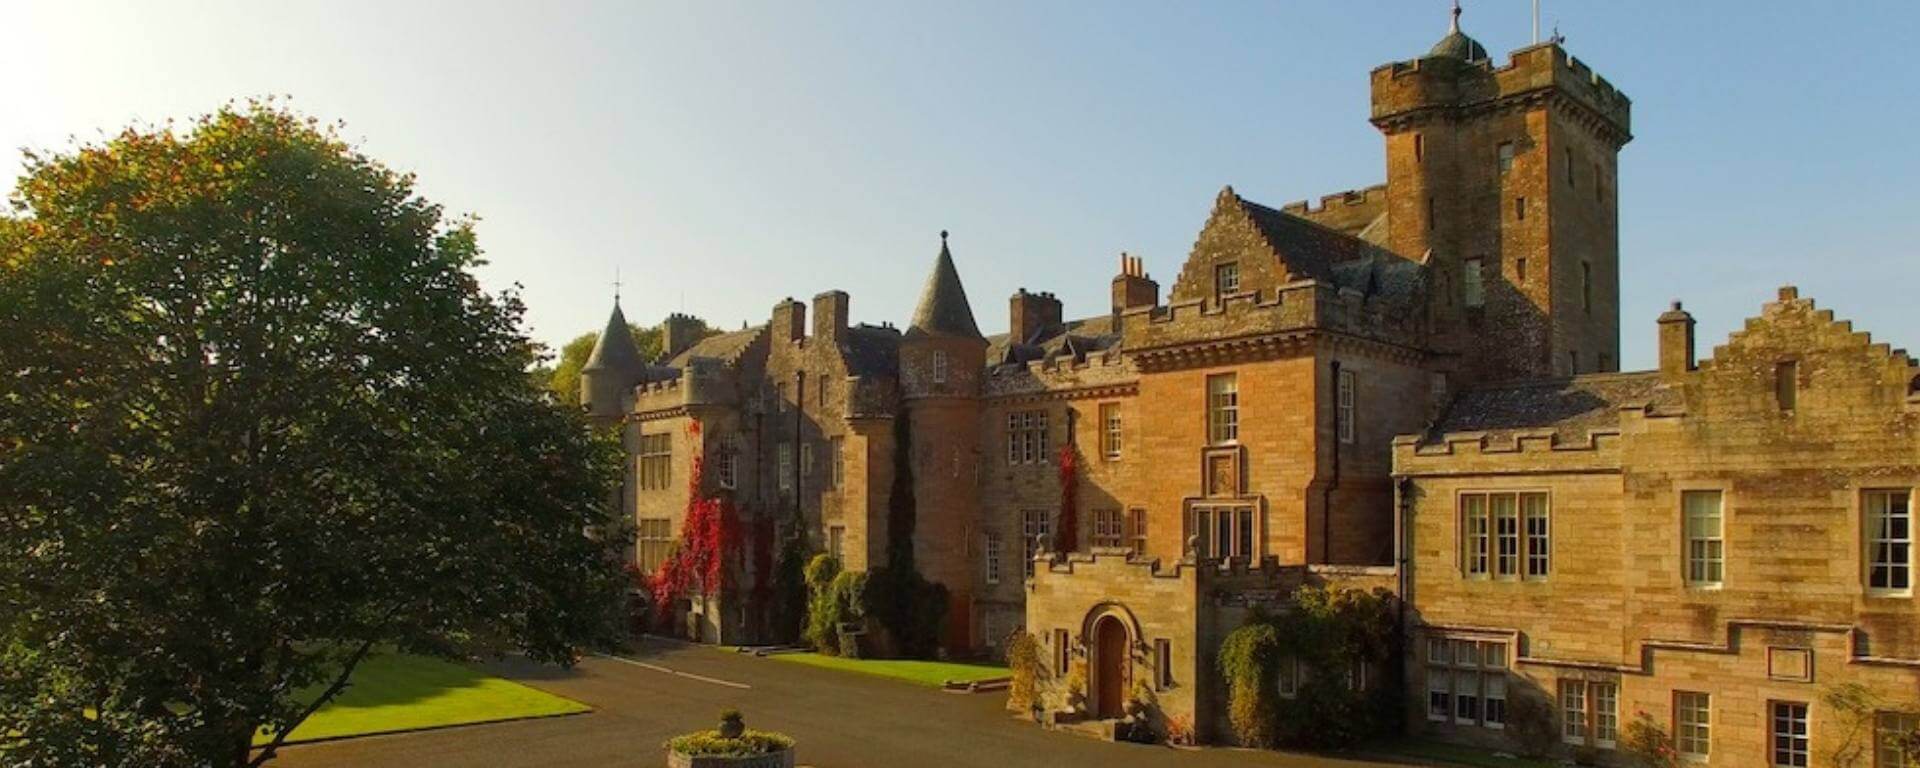 Spectacular exterior of the historic Glenapp Castle.